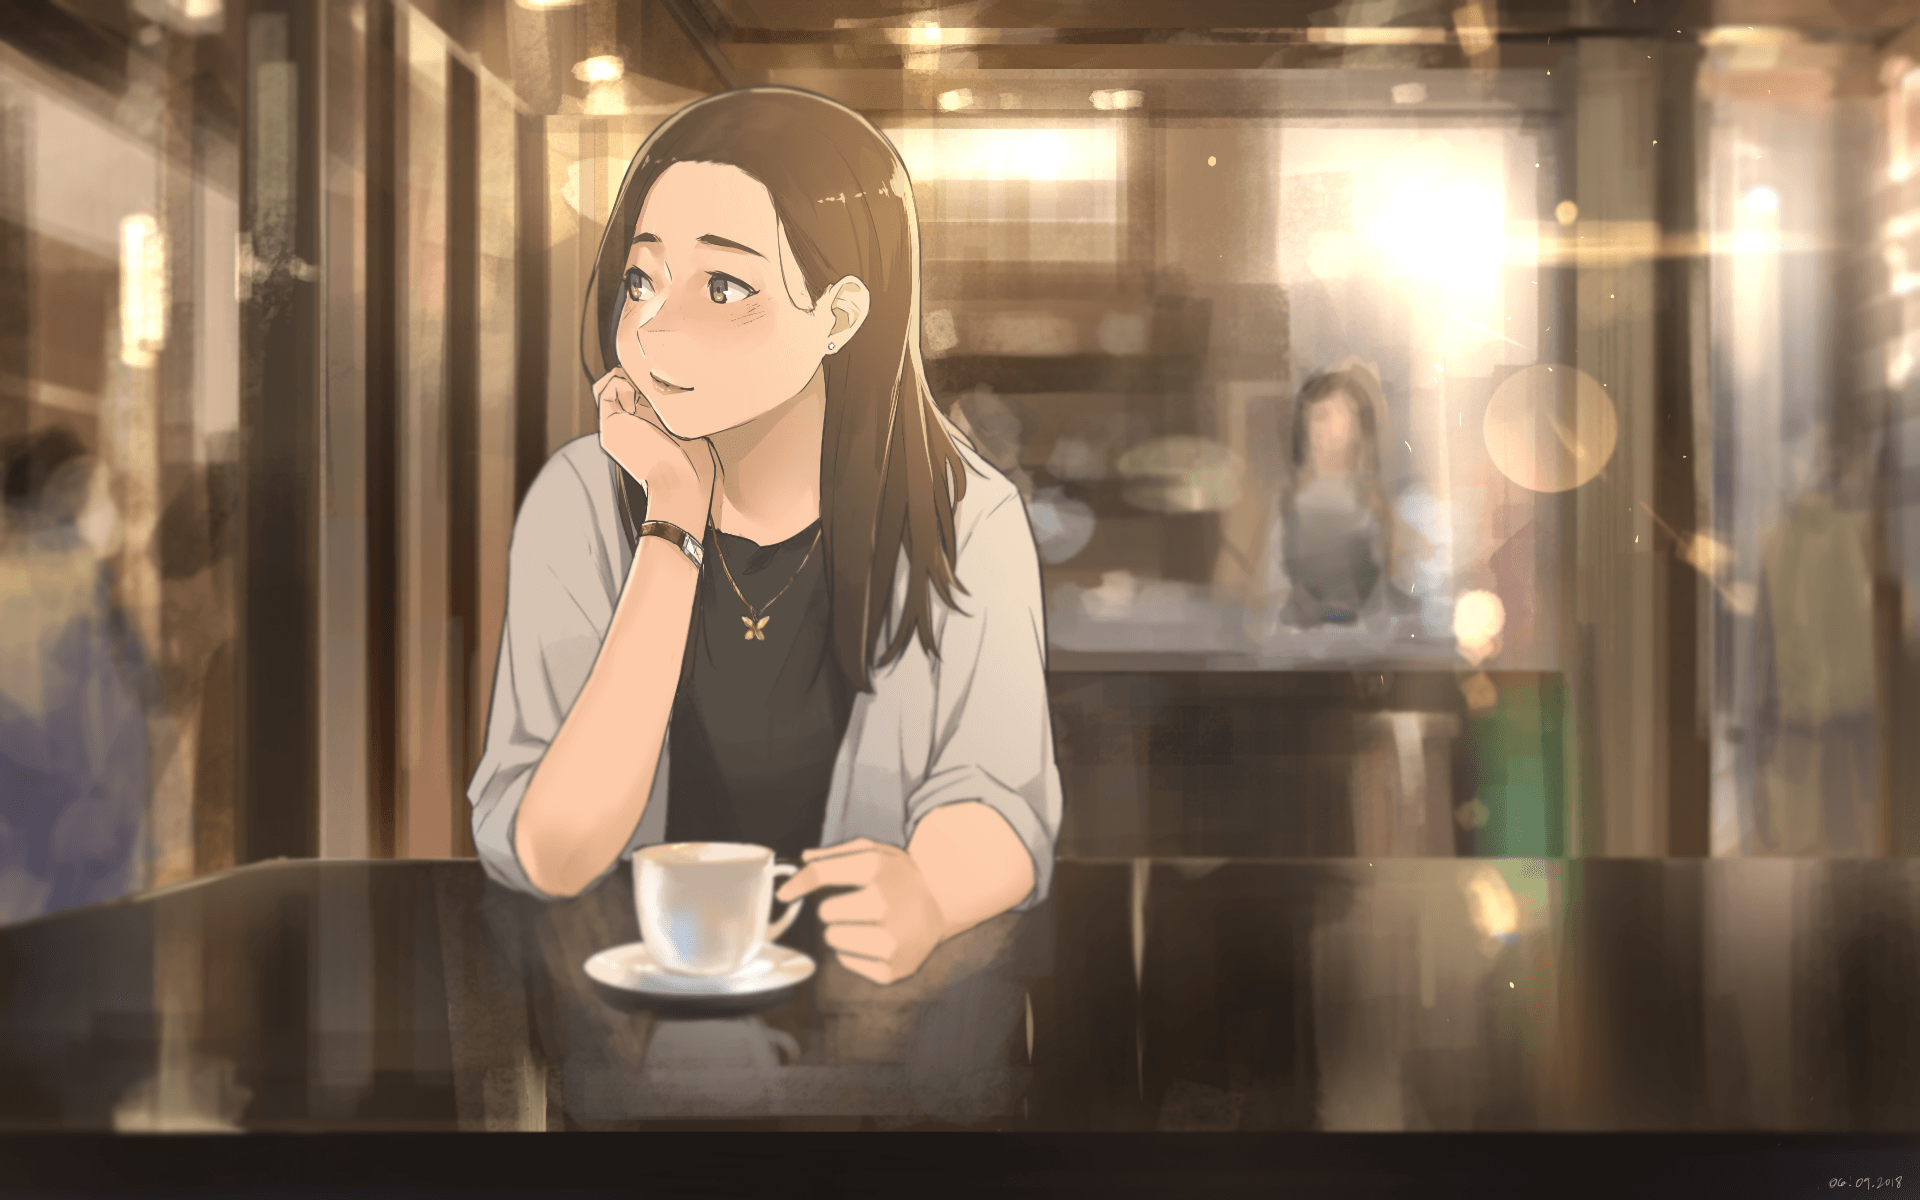 Anime Drinking Coffee Wallpapers